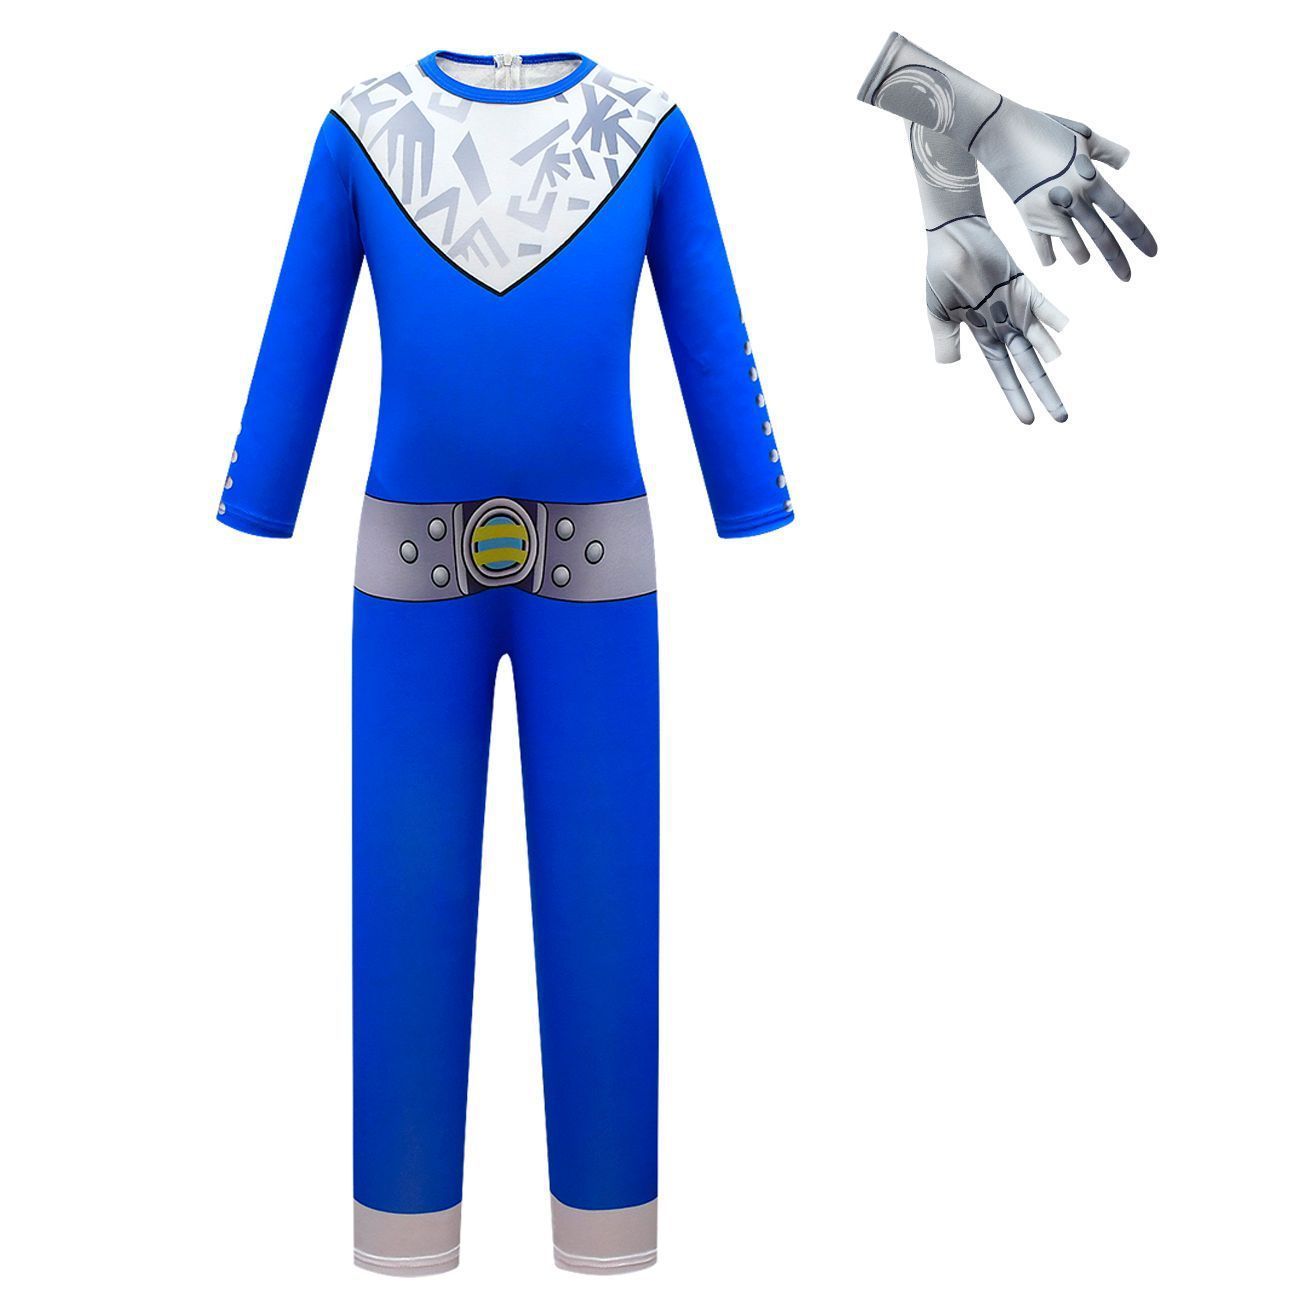 College Zombies 3 Blue Cosplay Zentai Suit Costume Jumpsuit Bodysuit Outfits for kids